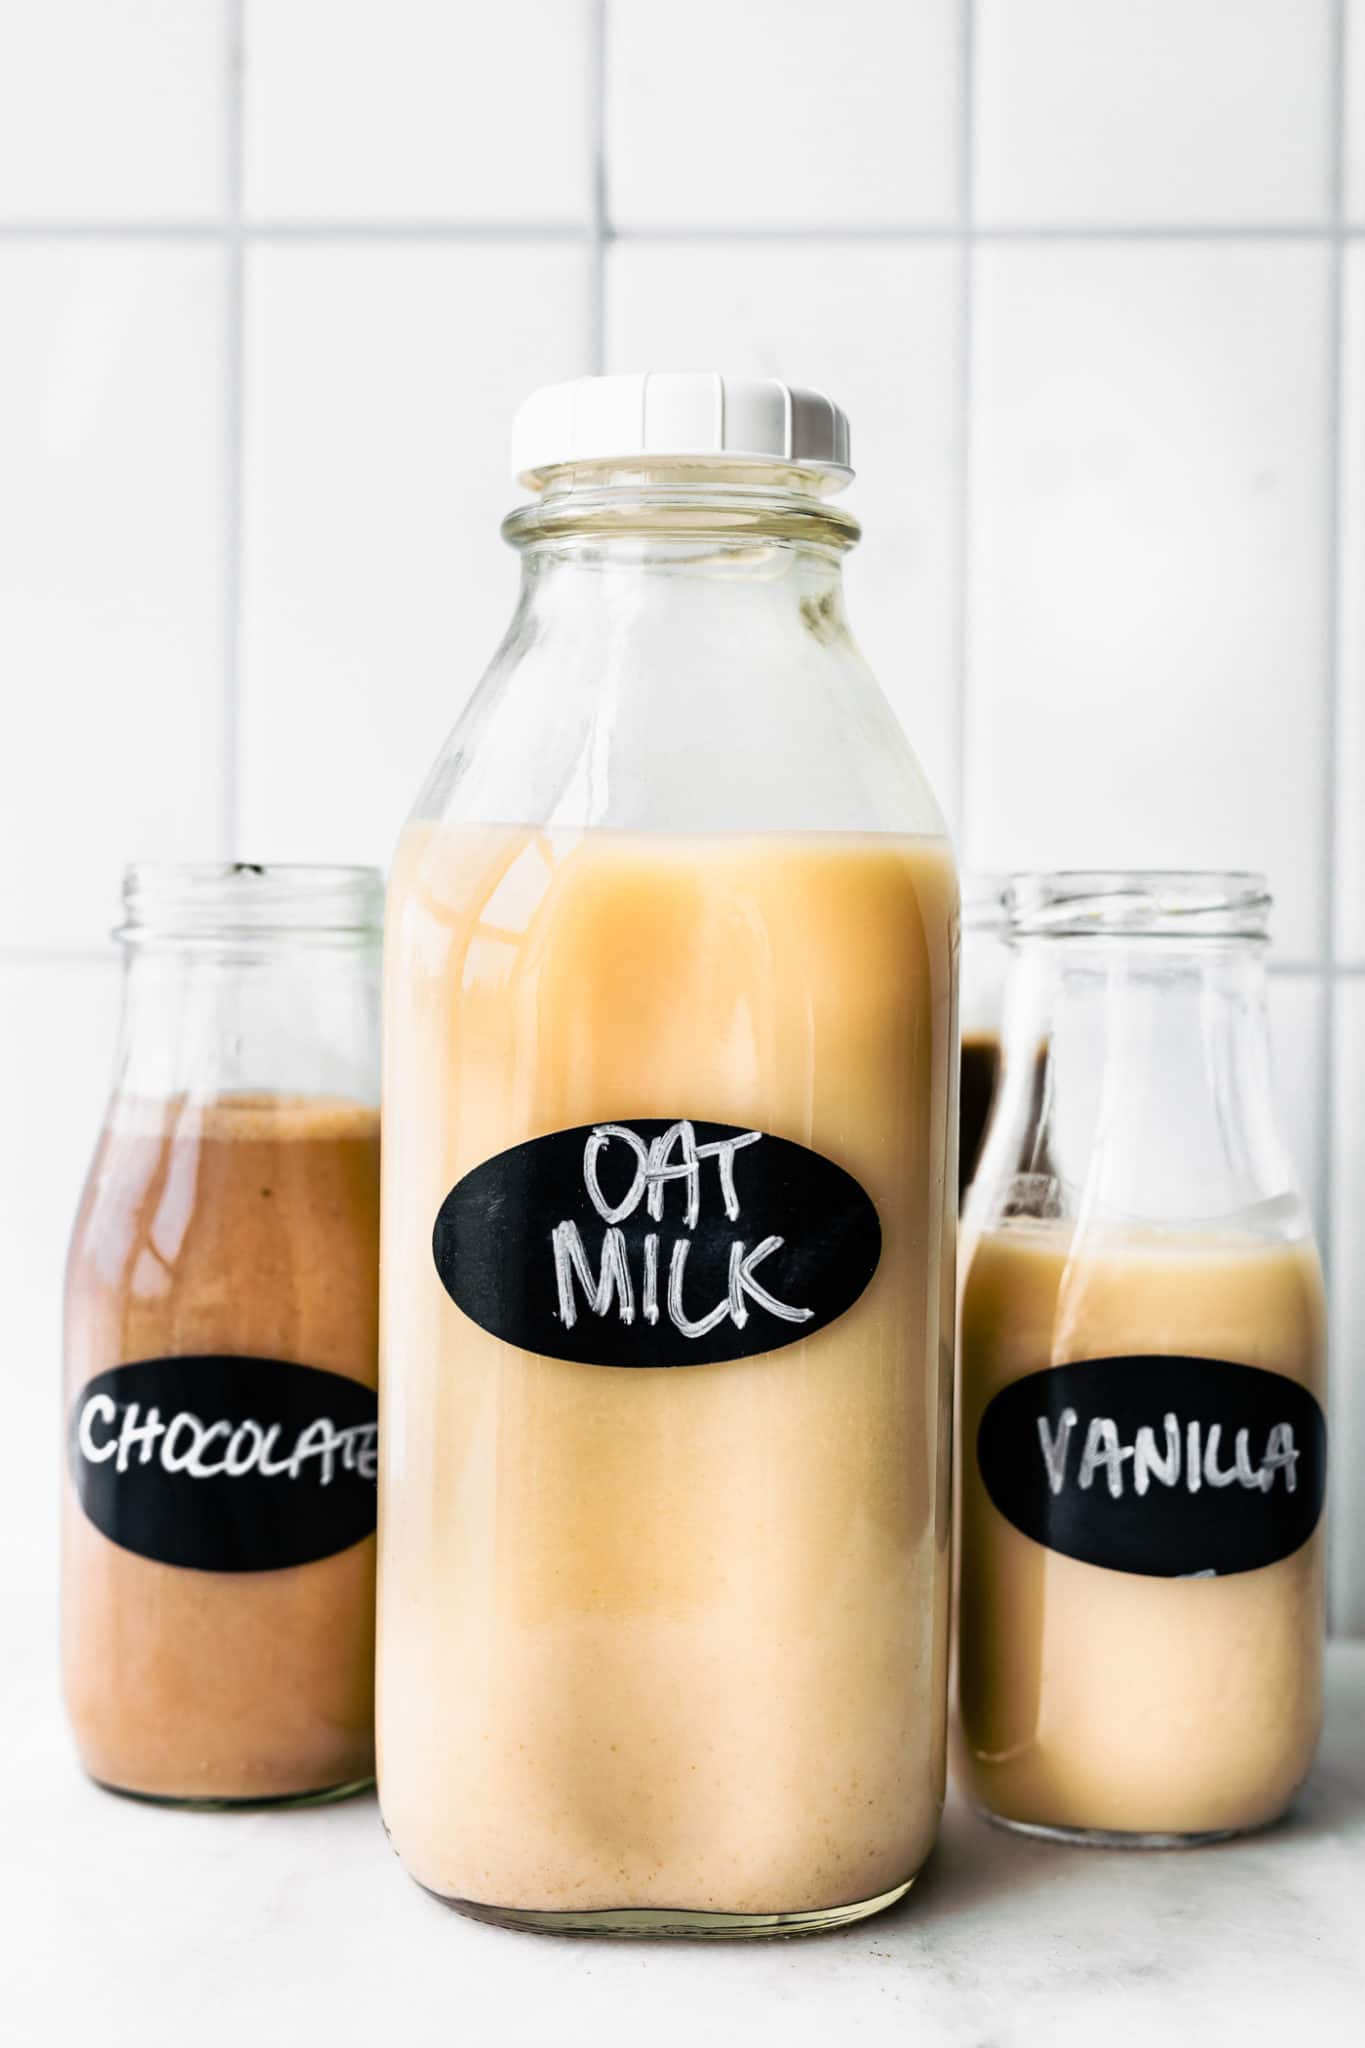 three glass jars of oat milk, the largest in the center labeled oat milk, the smaller jar on the left labeled chocolate, and the smaller. jar on the right labeled vanilla